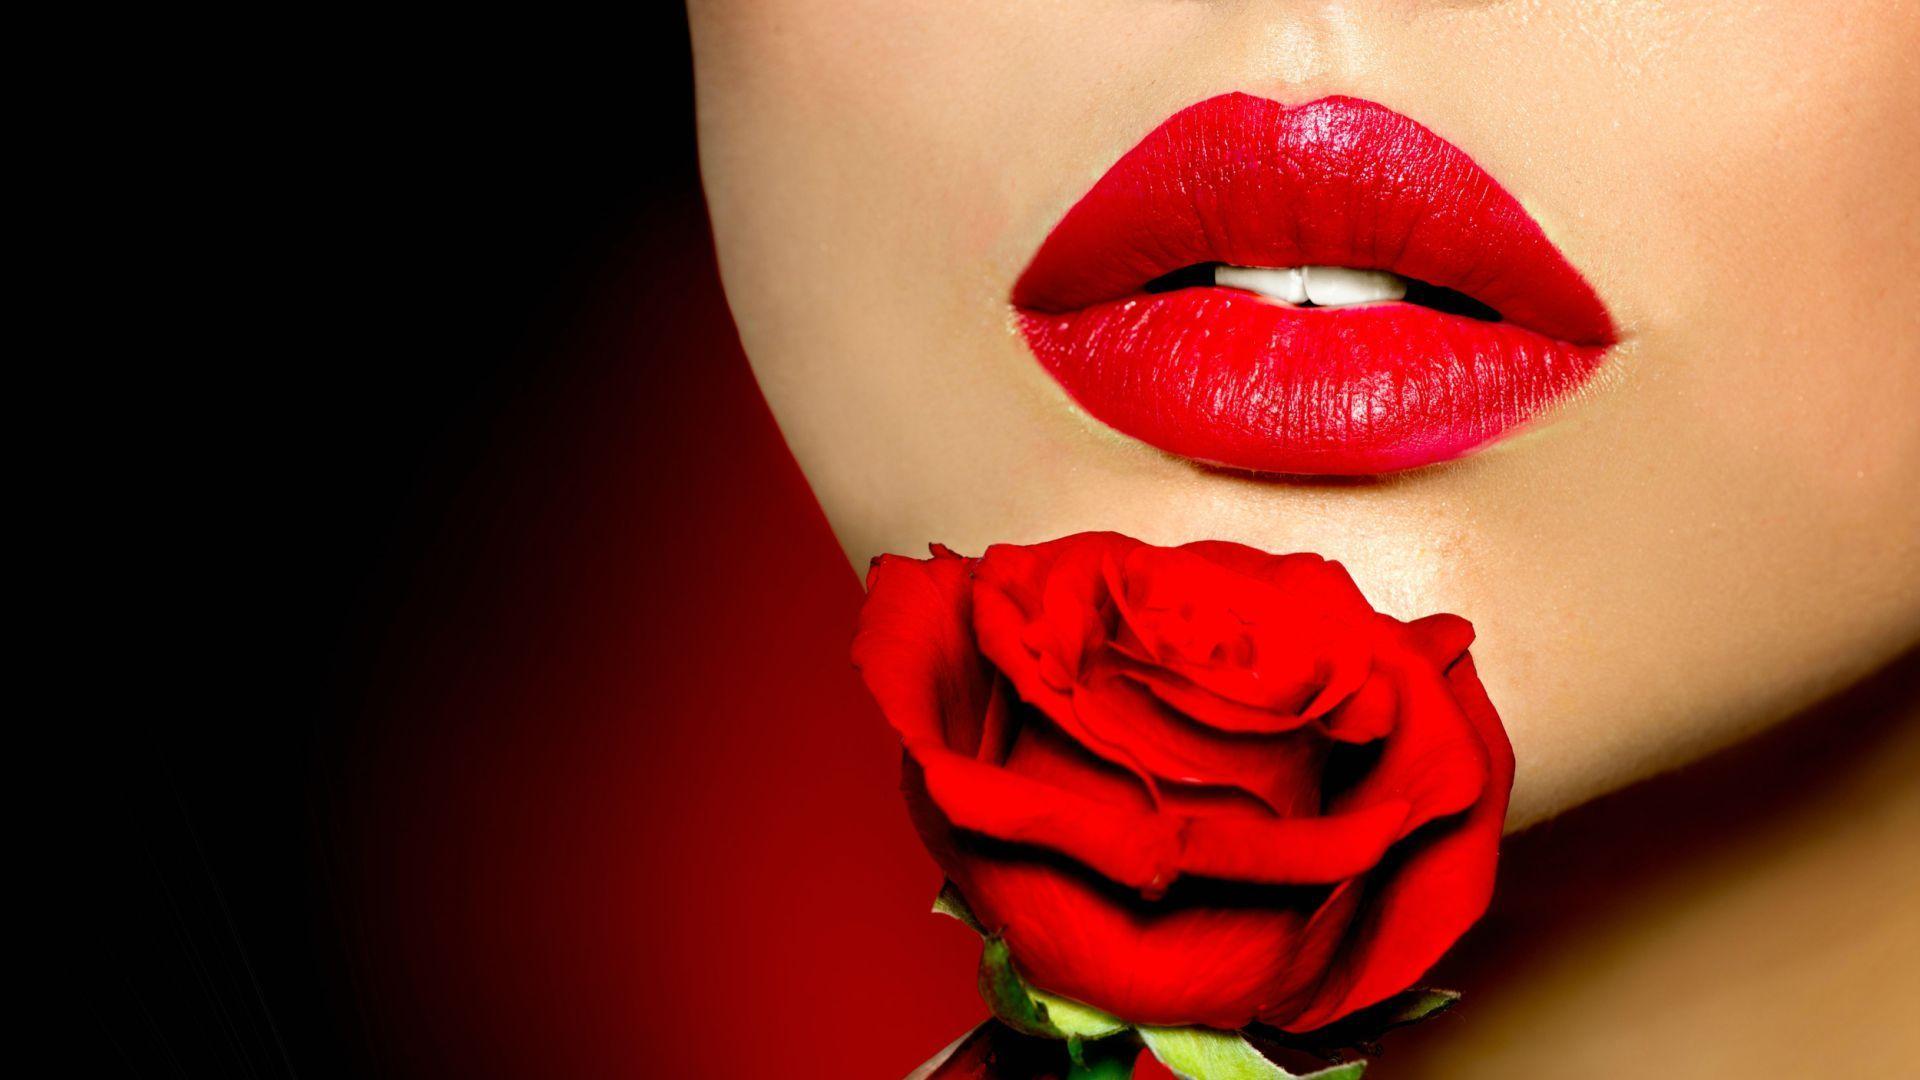 Lips Wallpaper HD Background, Image, Pics, Photo Free Download